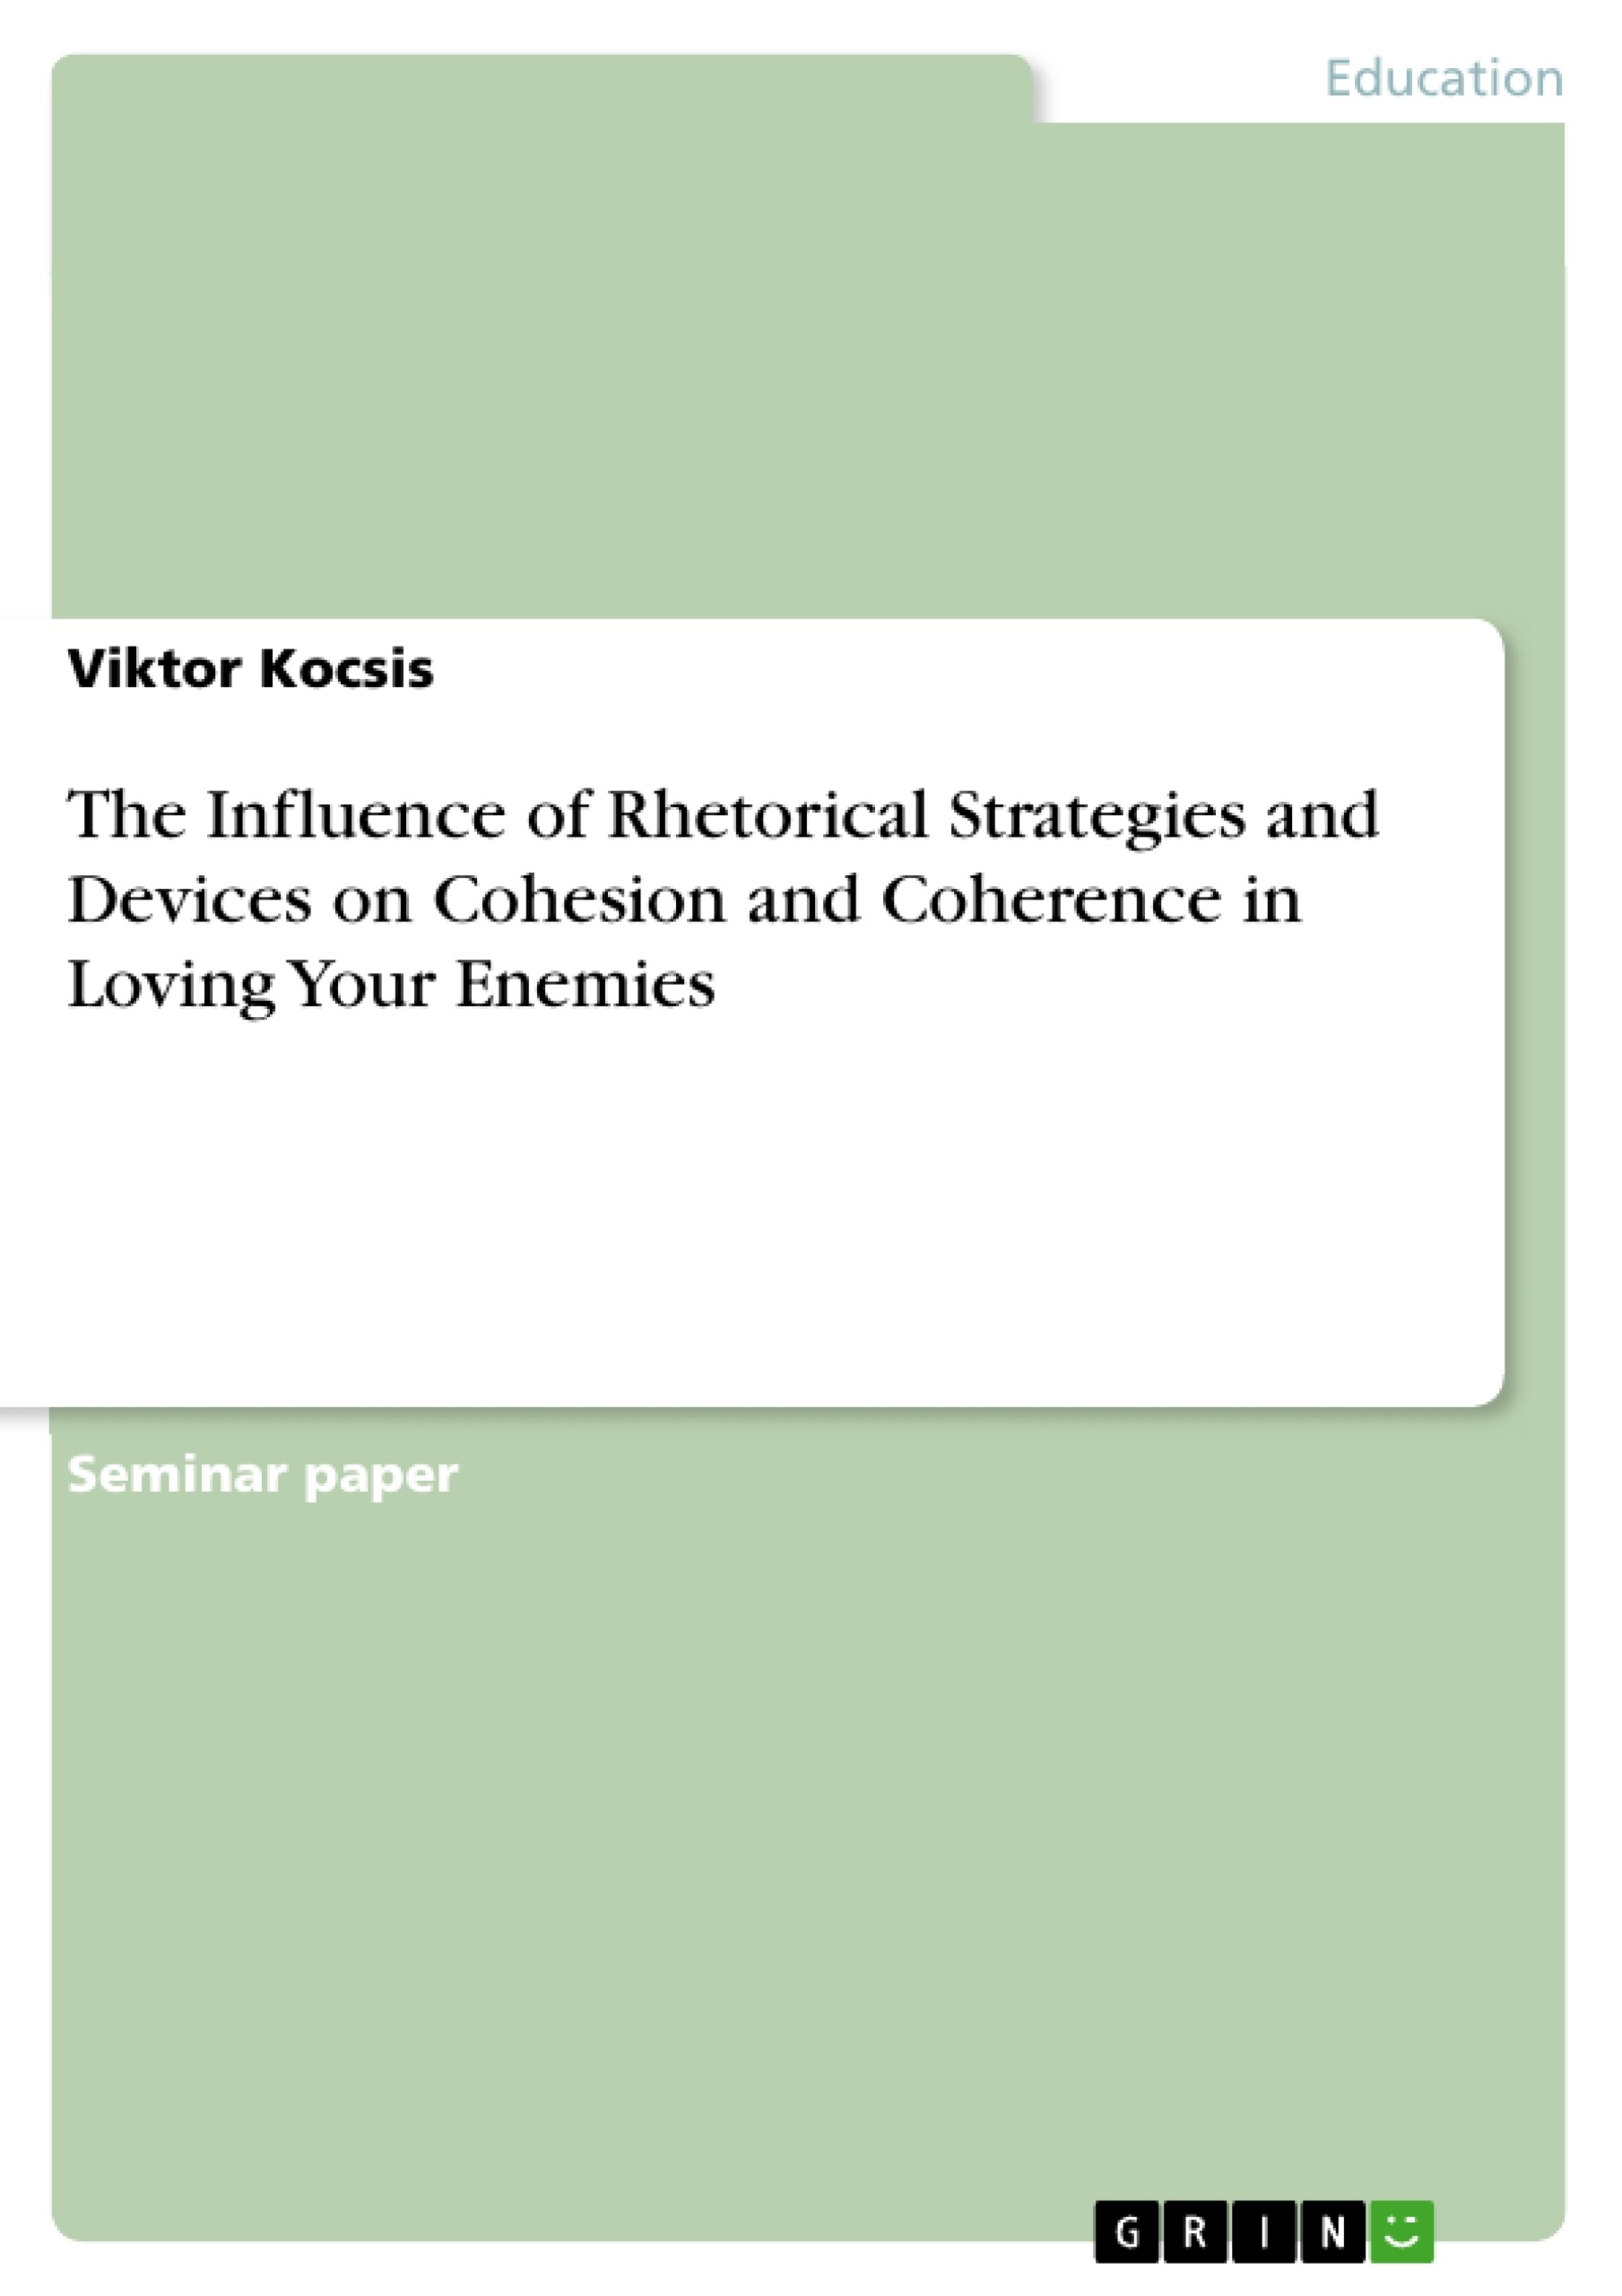 Título: The Influence of Rhetorical Strategies and Devices on Cohesion and Coherence in Loving Your Enemies